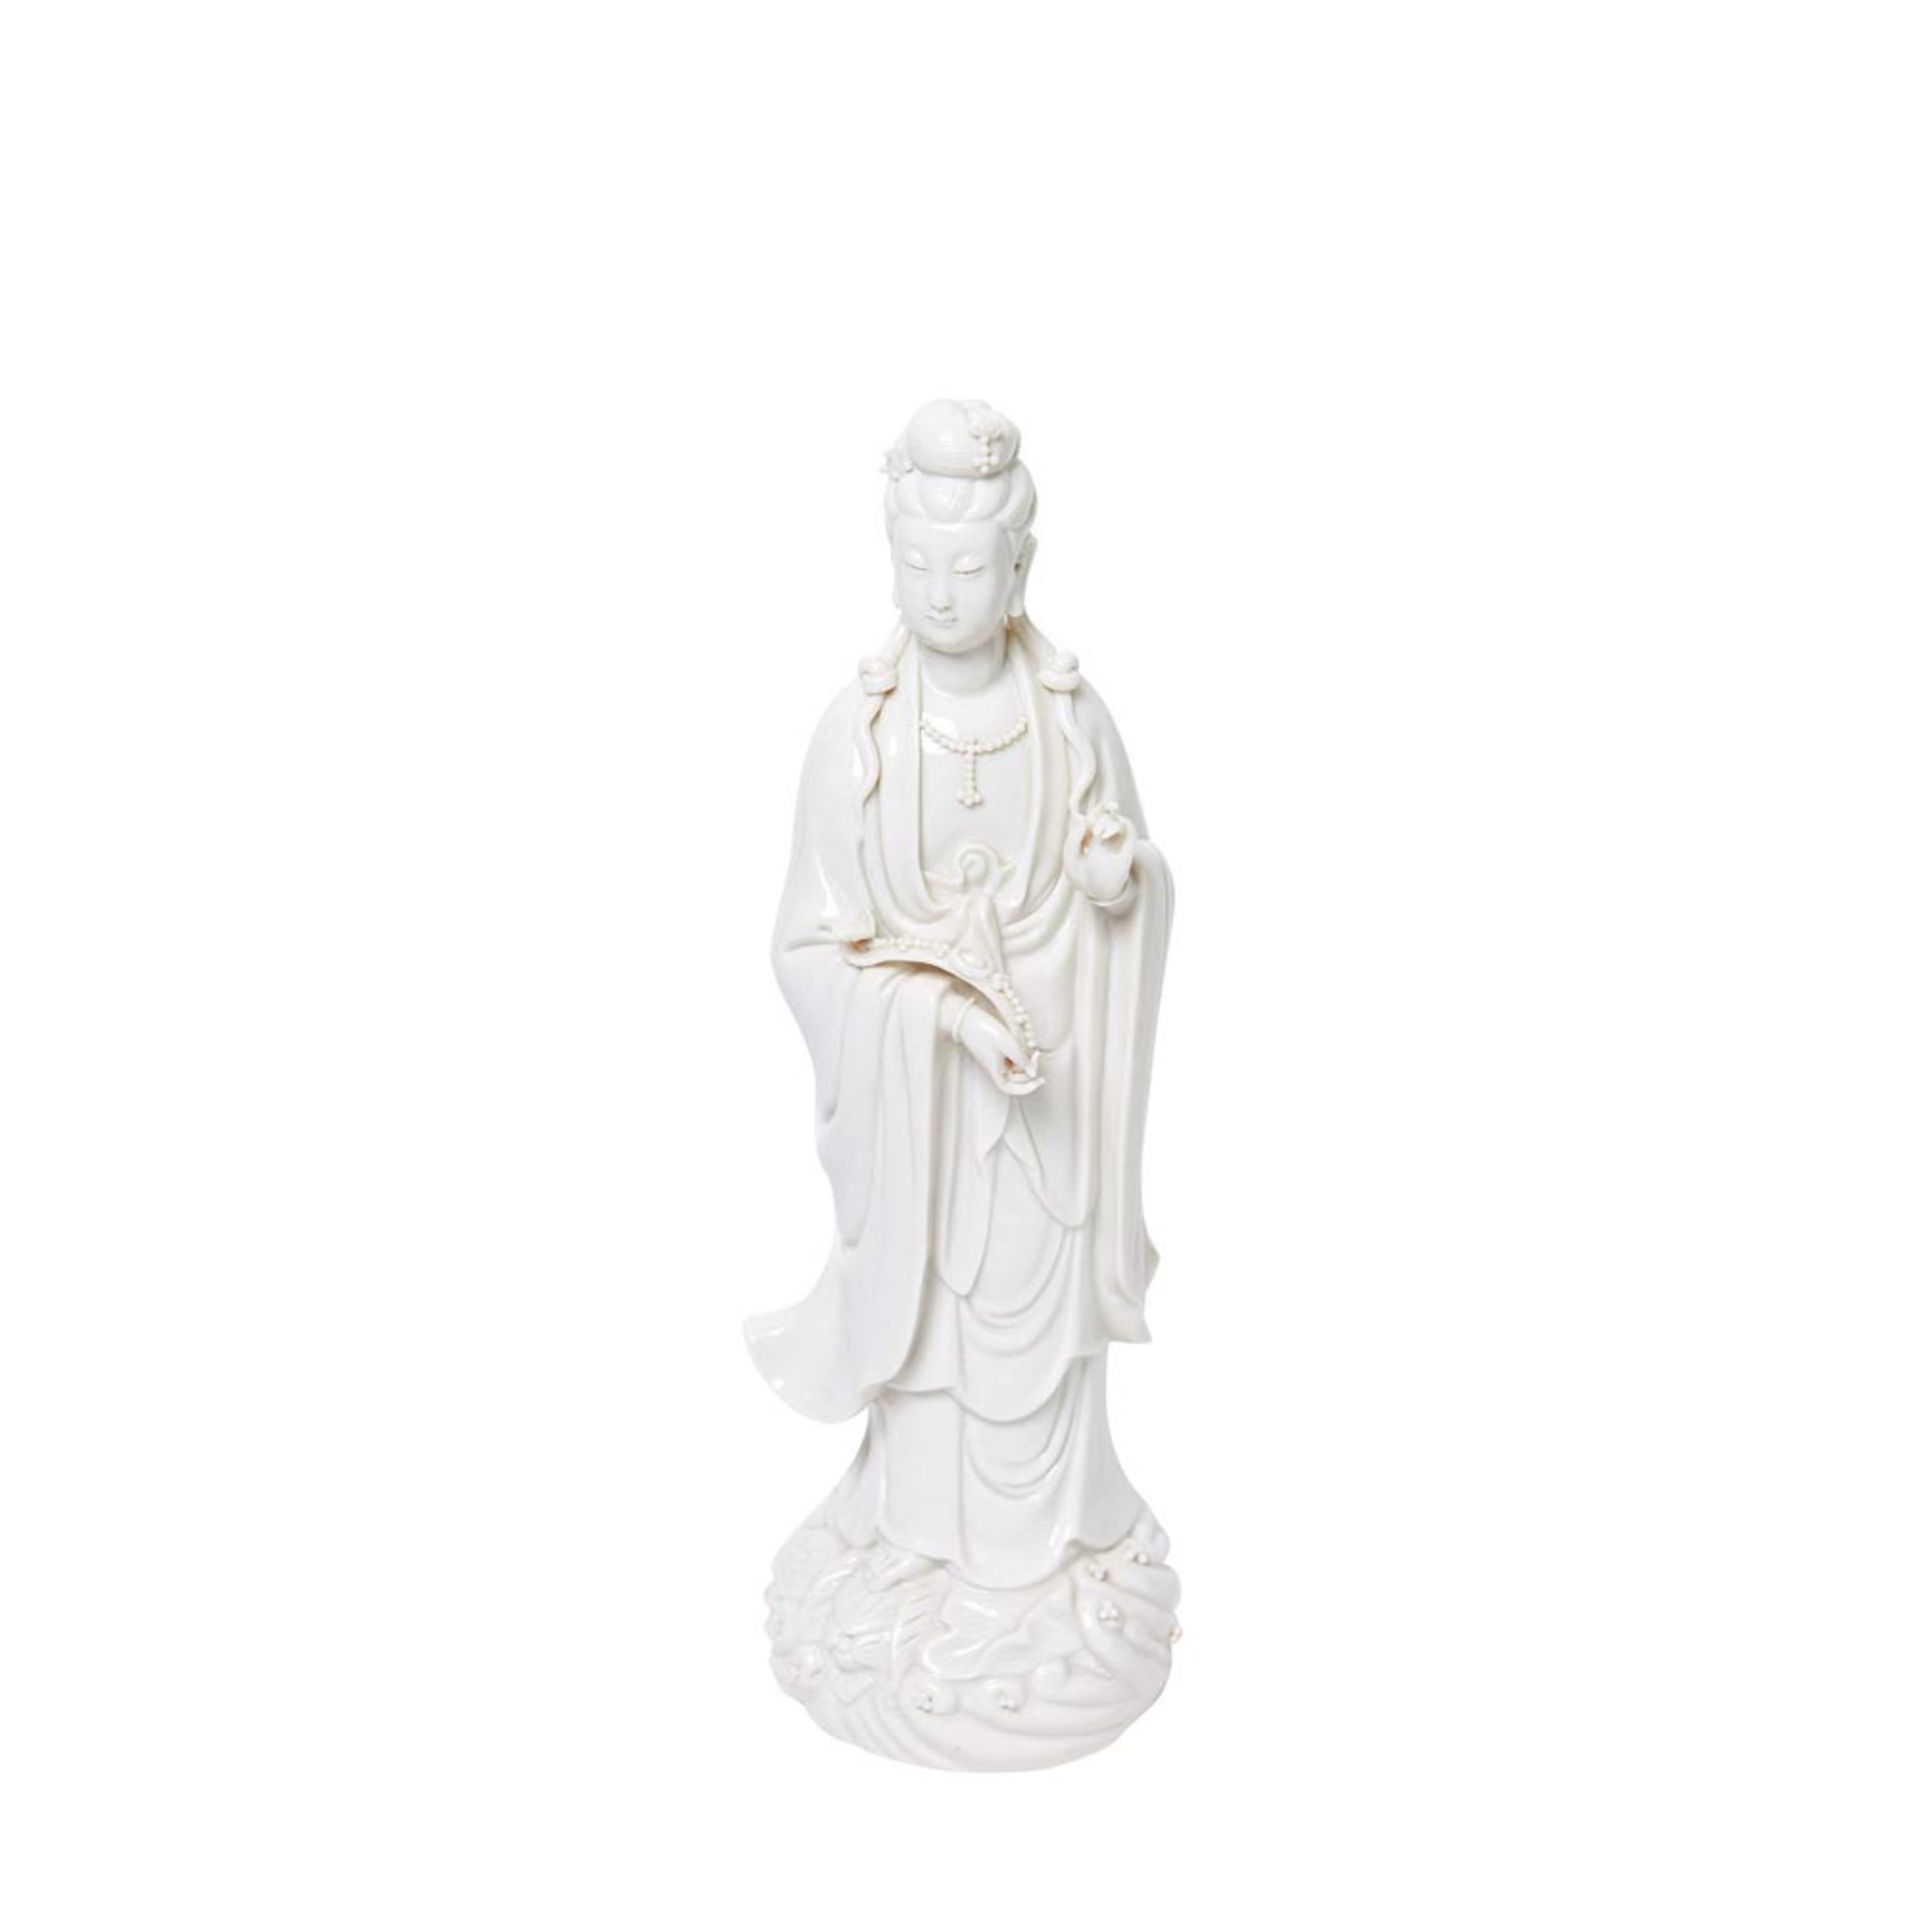 Chinese white porcelain figure